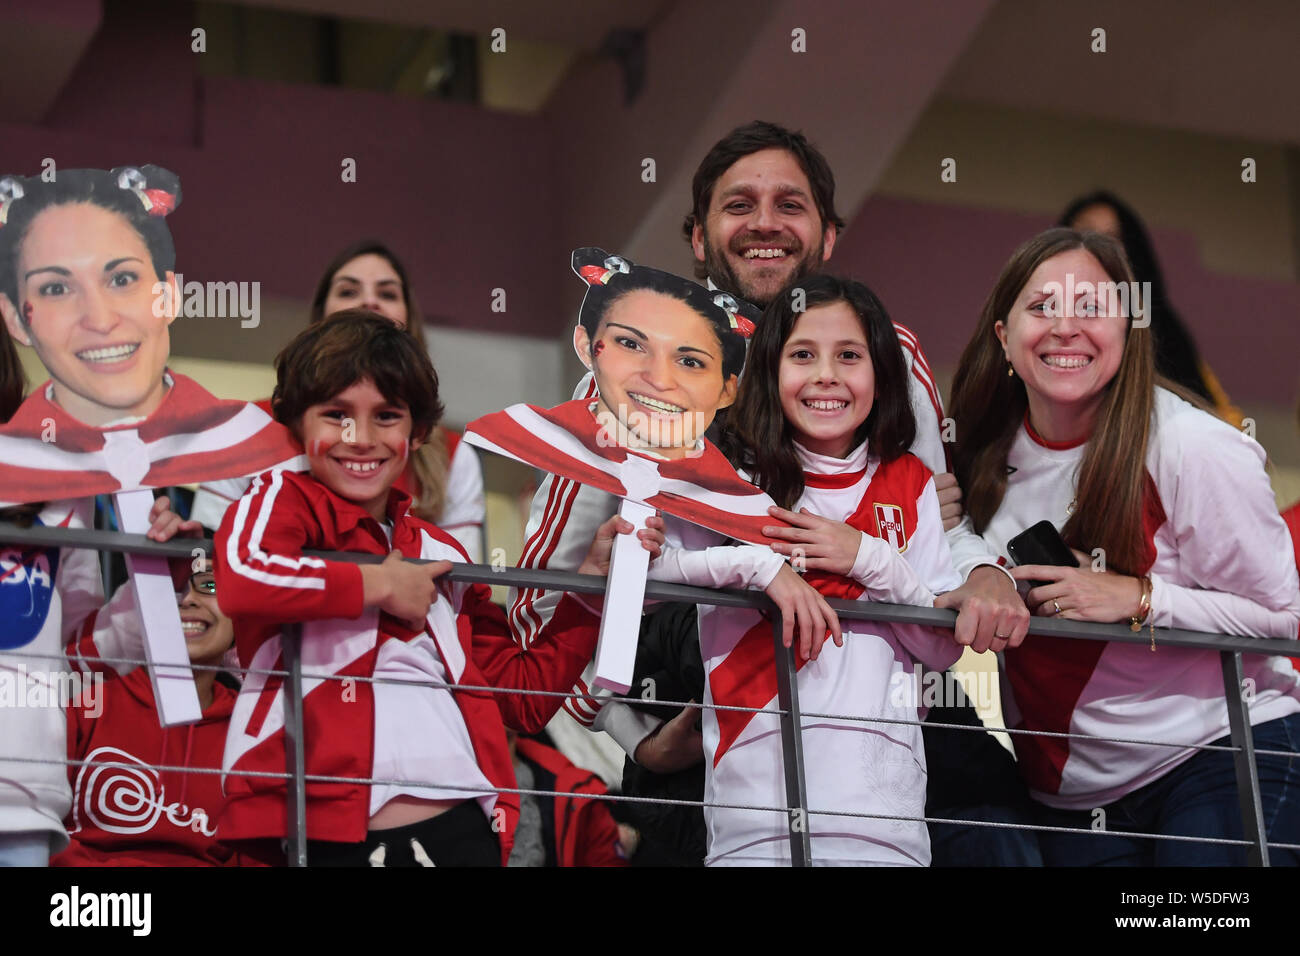 July 27, 2019, Lima, Peru: Peruvian fans cheer on their team during the team finals competition held in the Polideportivo Villa El Salvador  in Lima, Peru. (Credit Image: © Amy Sanderson/ZUMA Wire) Stock Photo